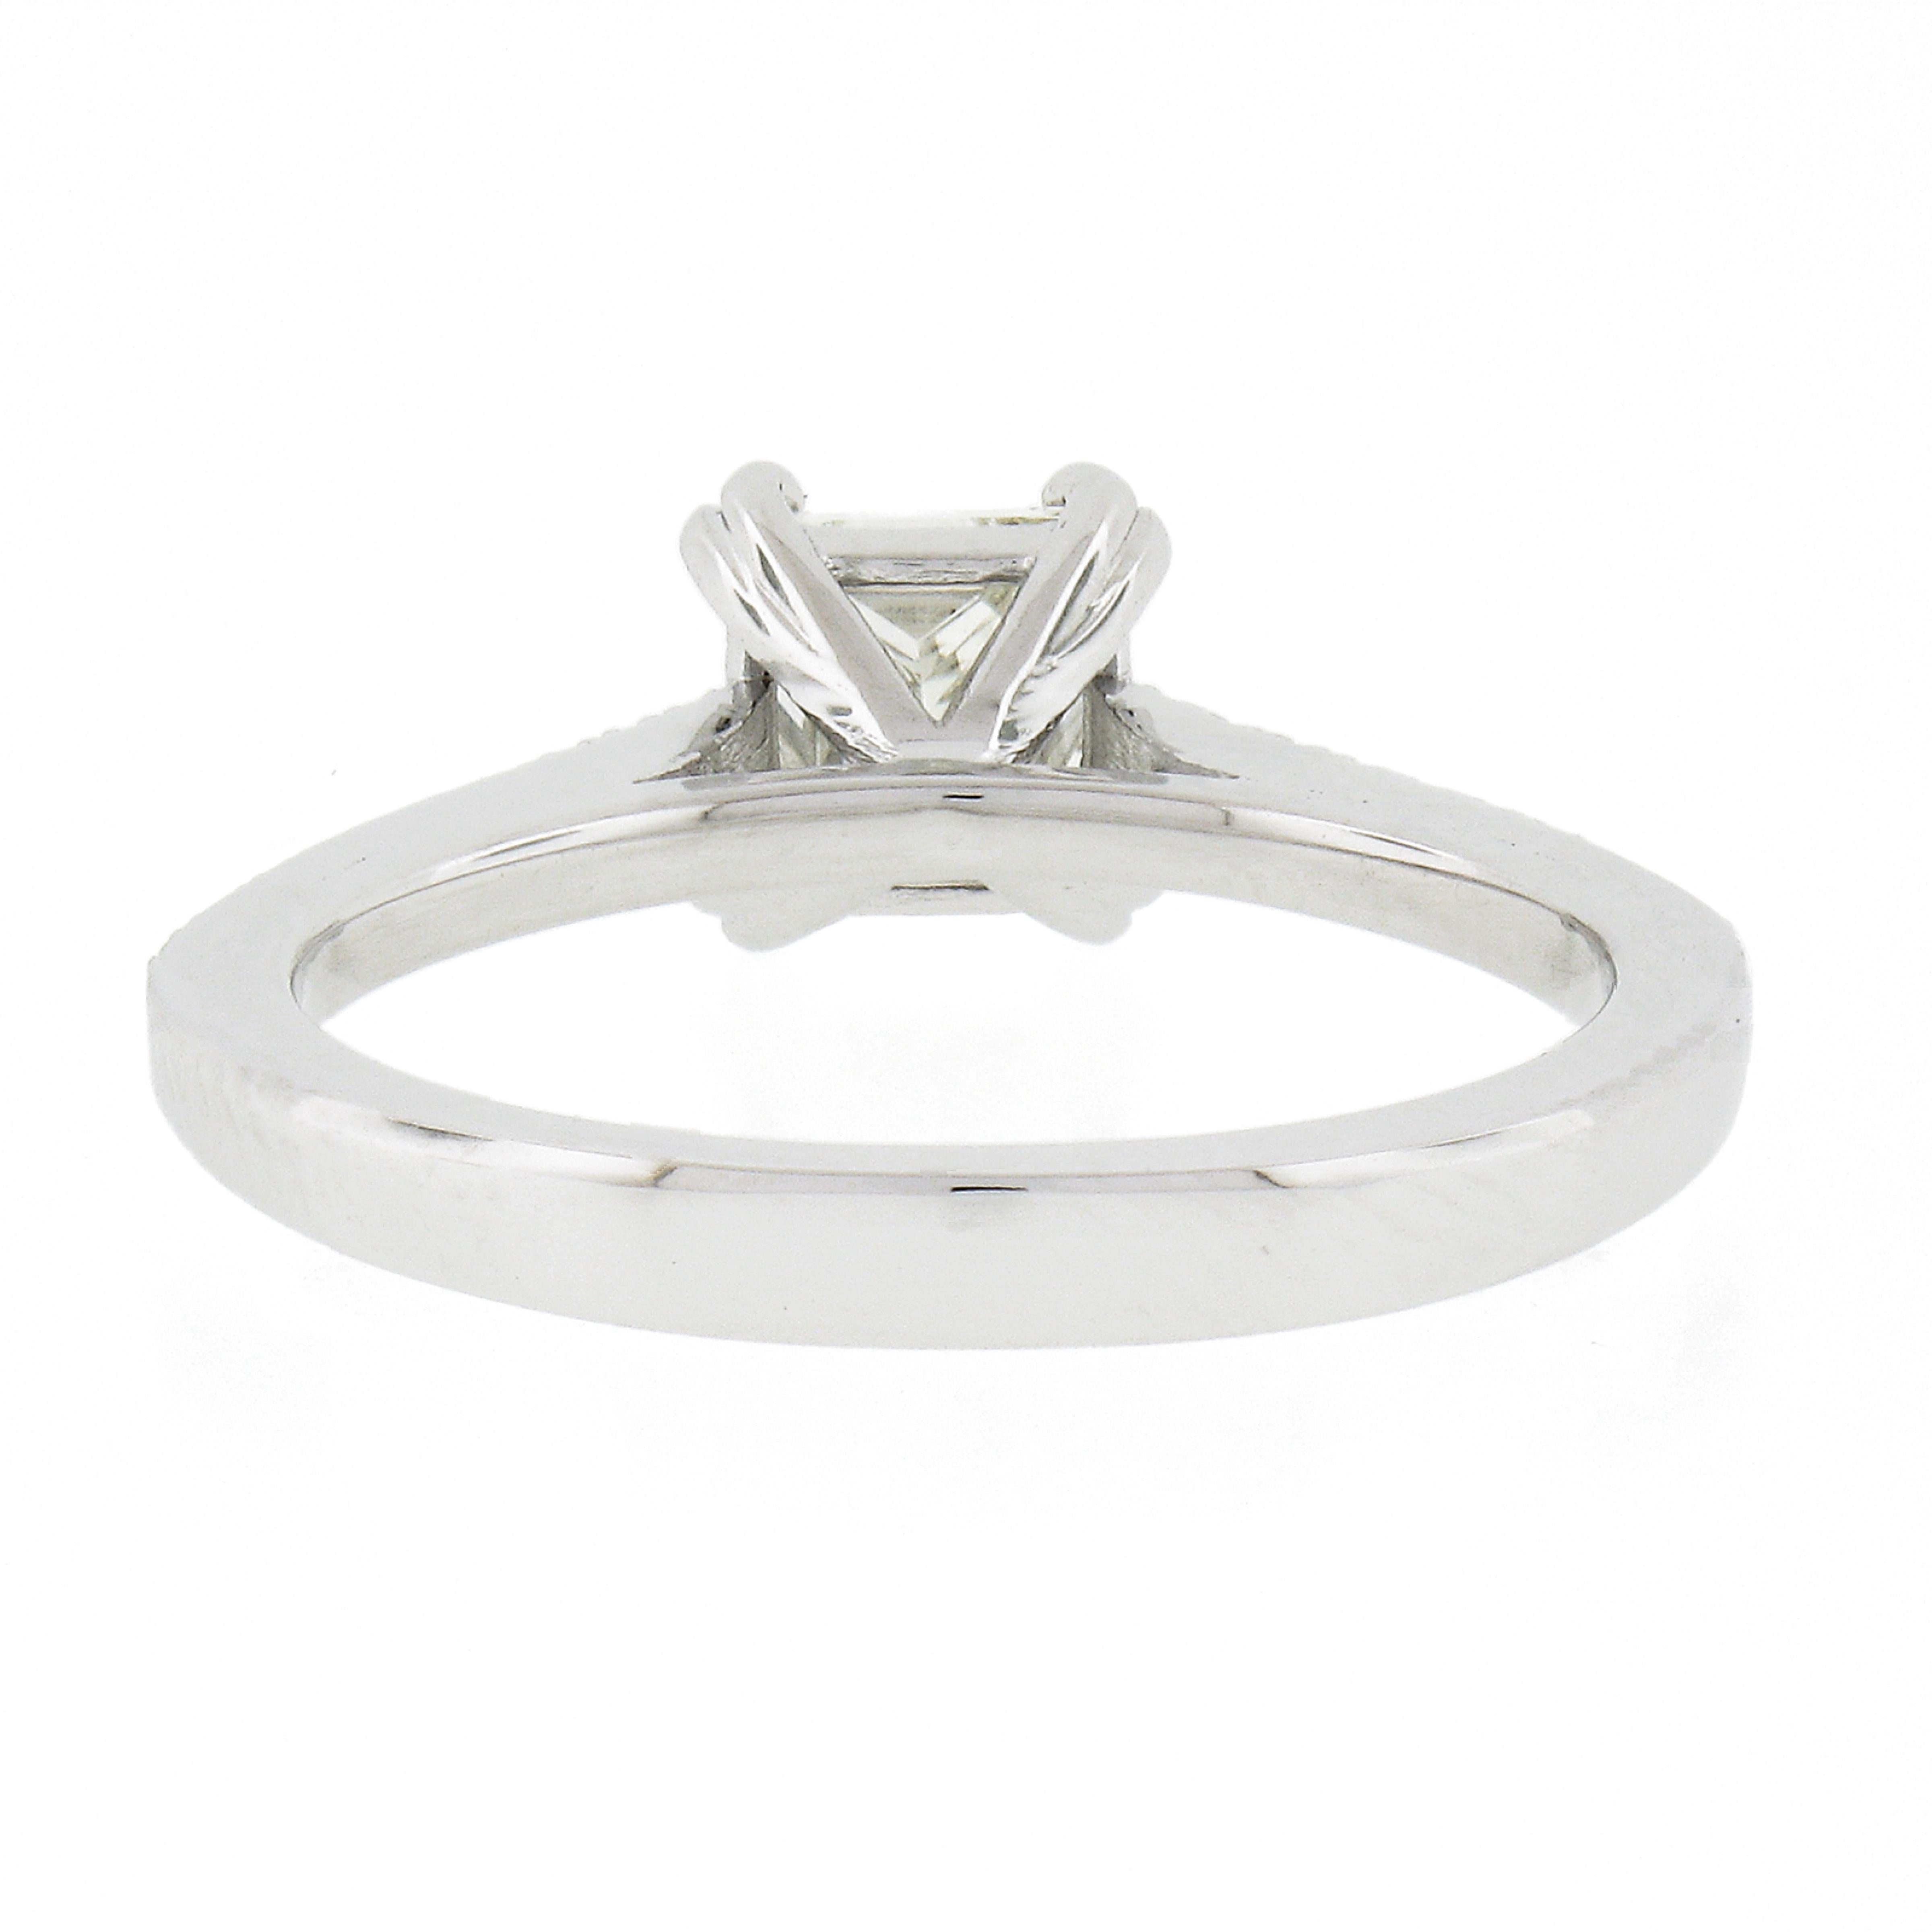 New 14k White Gold 1.12ctw GIA Princess Cut Diamond Solitaire Engagement Ring For Sale 3